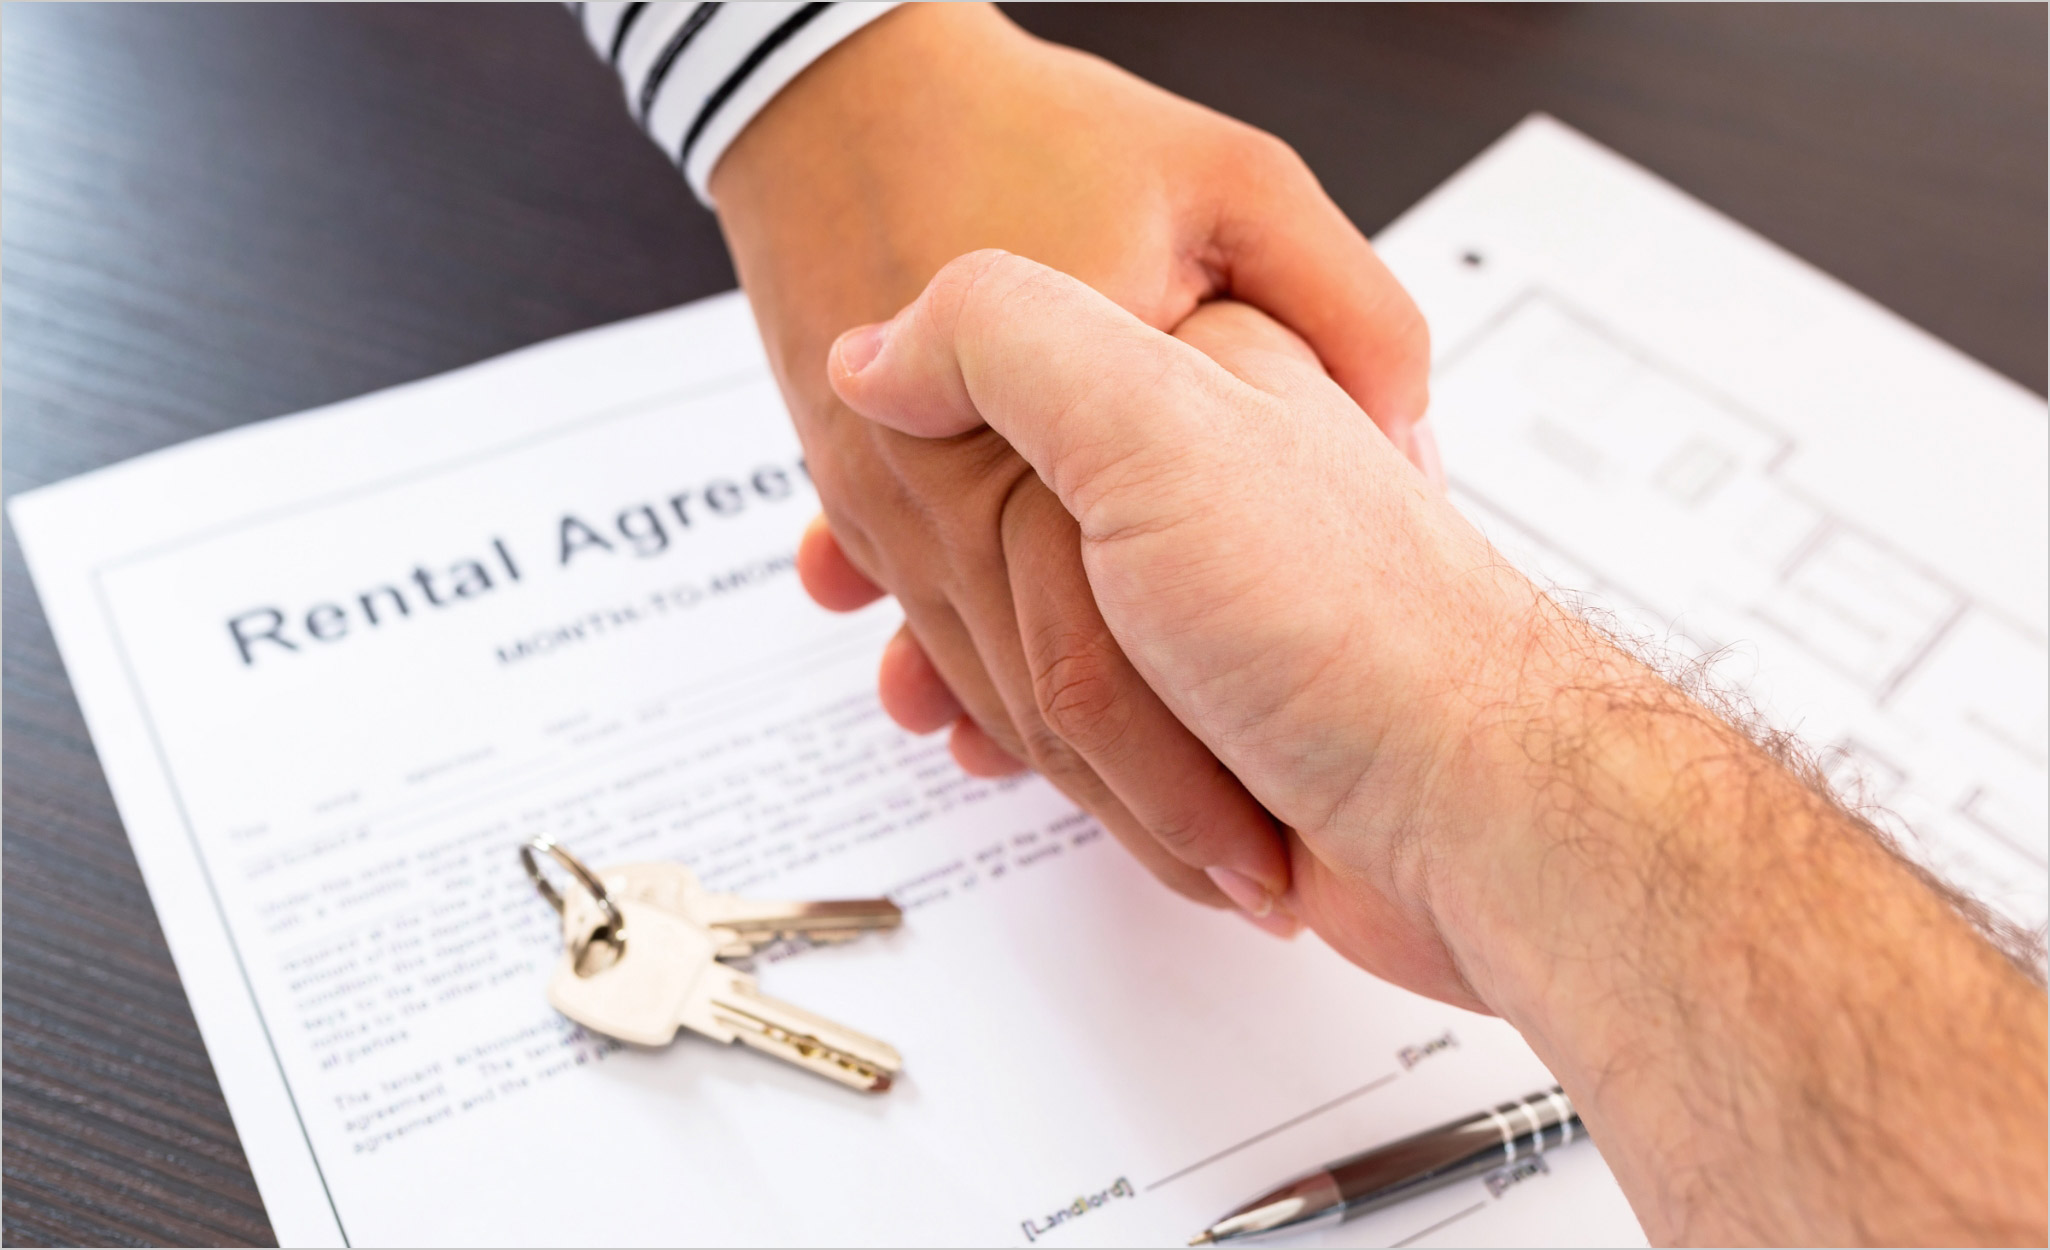 Two people shake hands over a rental agreement.